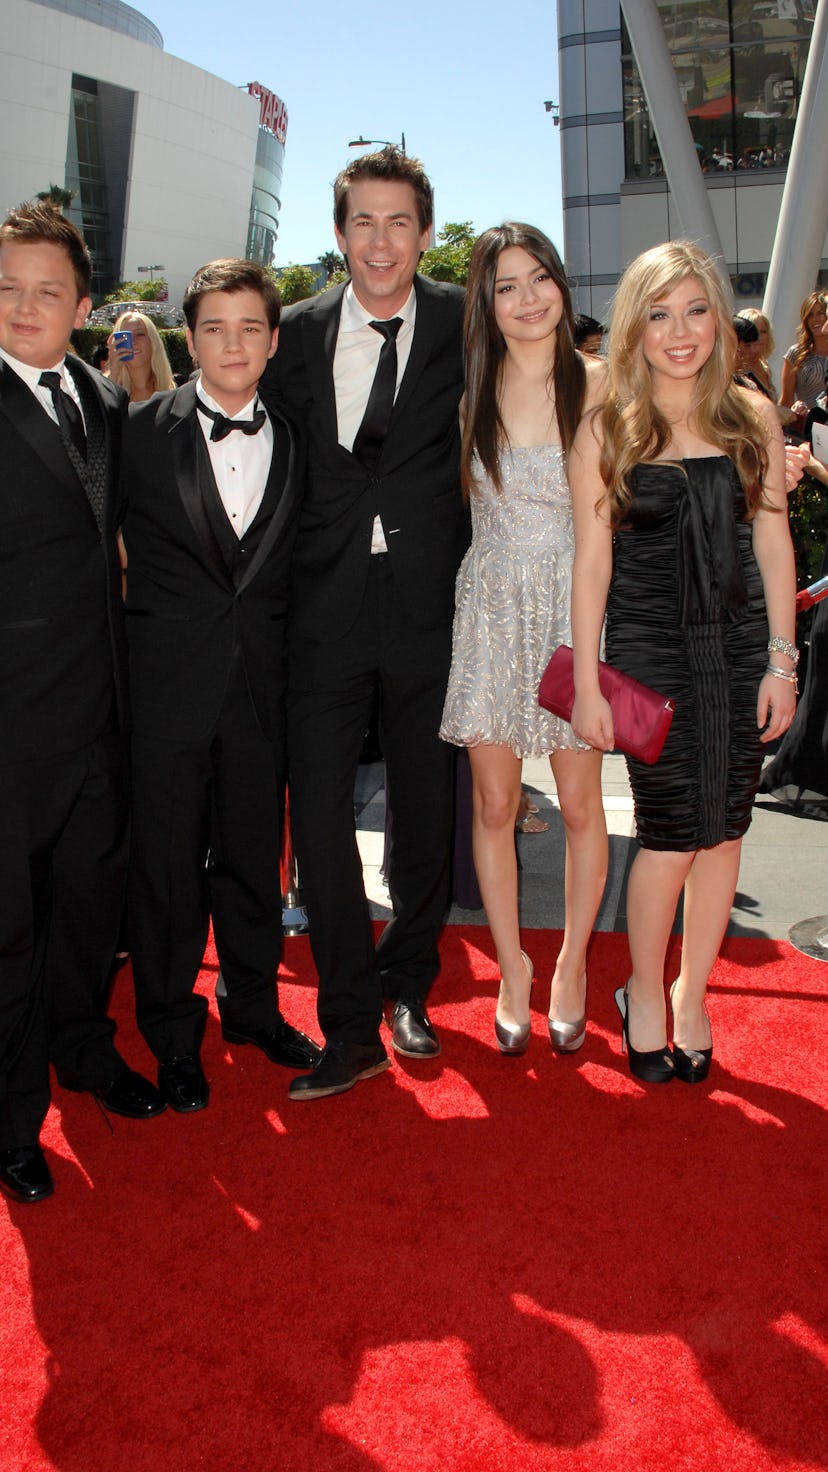 The cast of 'iCarly' is reuniting for a revival at Paramount+. Photo via Patrick McMullan/Patrick Mc...